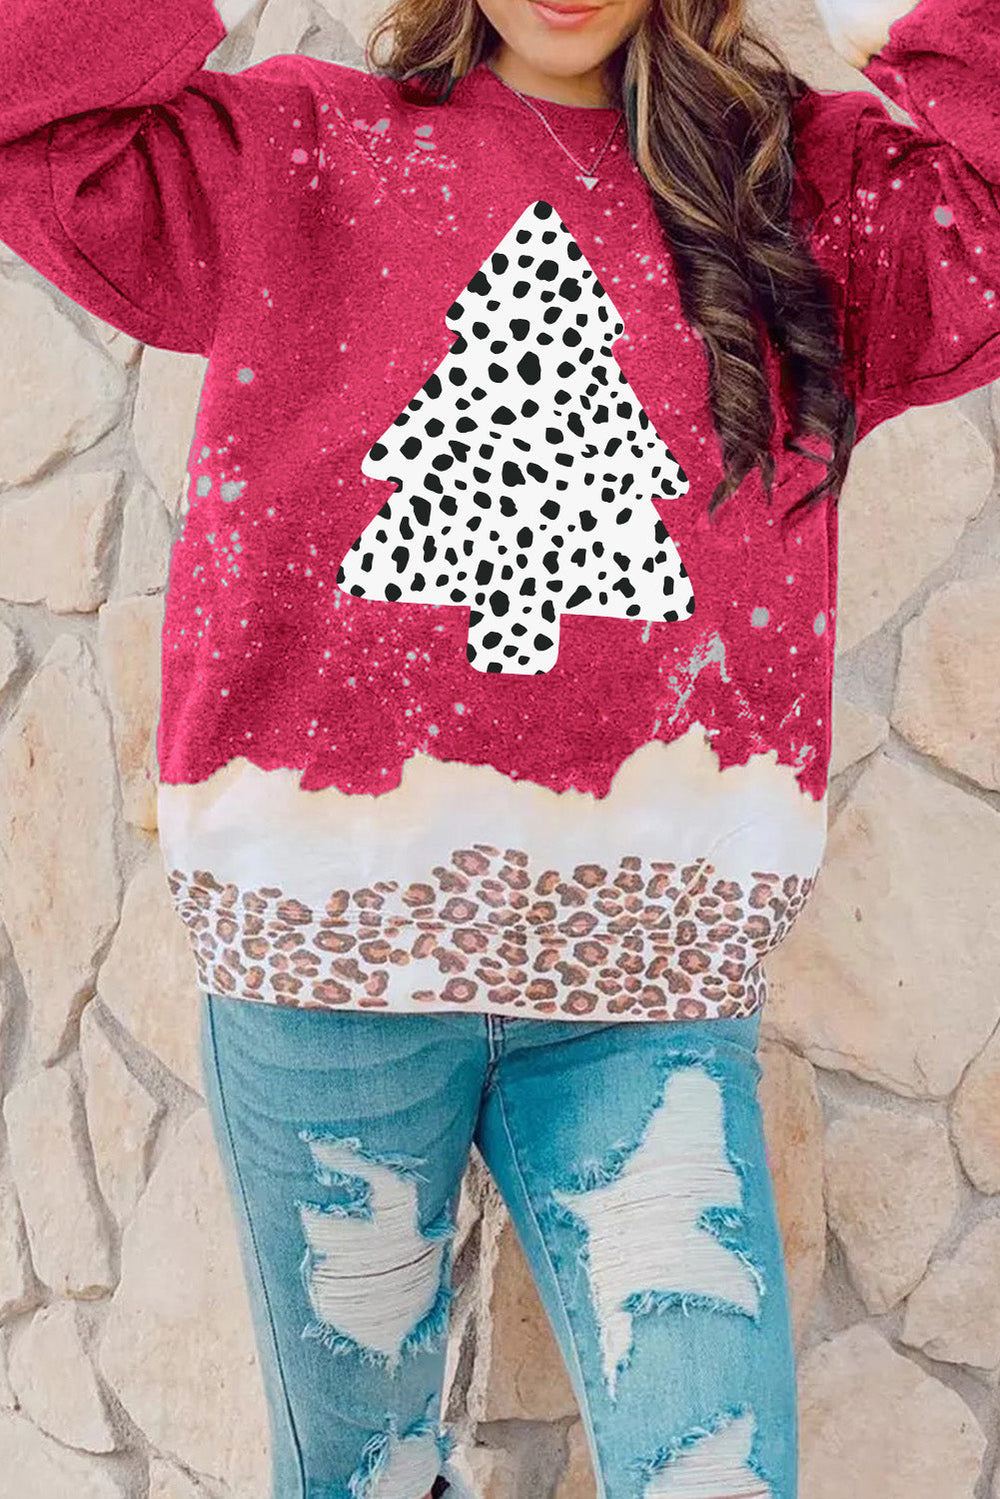 Red Leopard Christmas Tree Print Loose Fit Graphic Sweatshirt